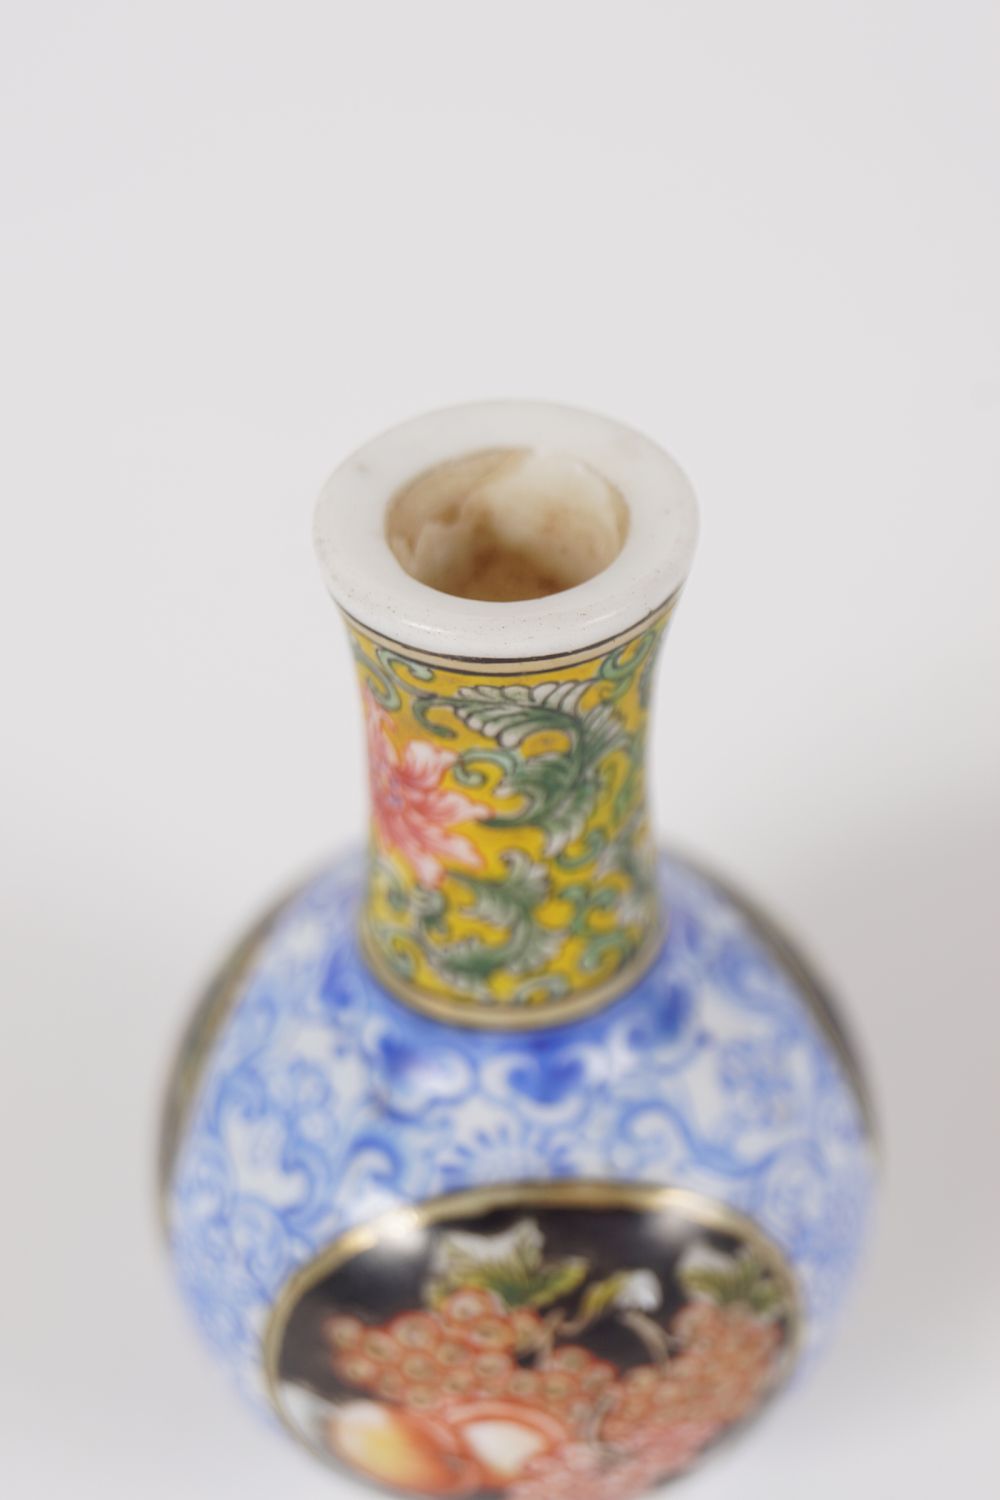 CHINESE QING POLYCHROME GLASS VASE - Image 4 of 5